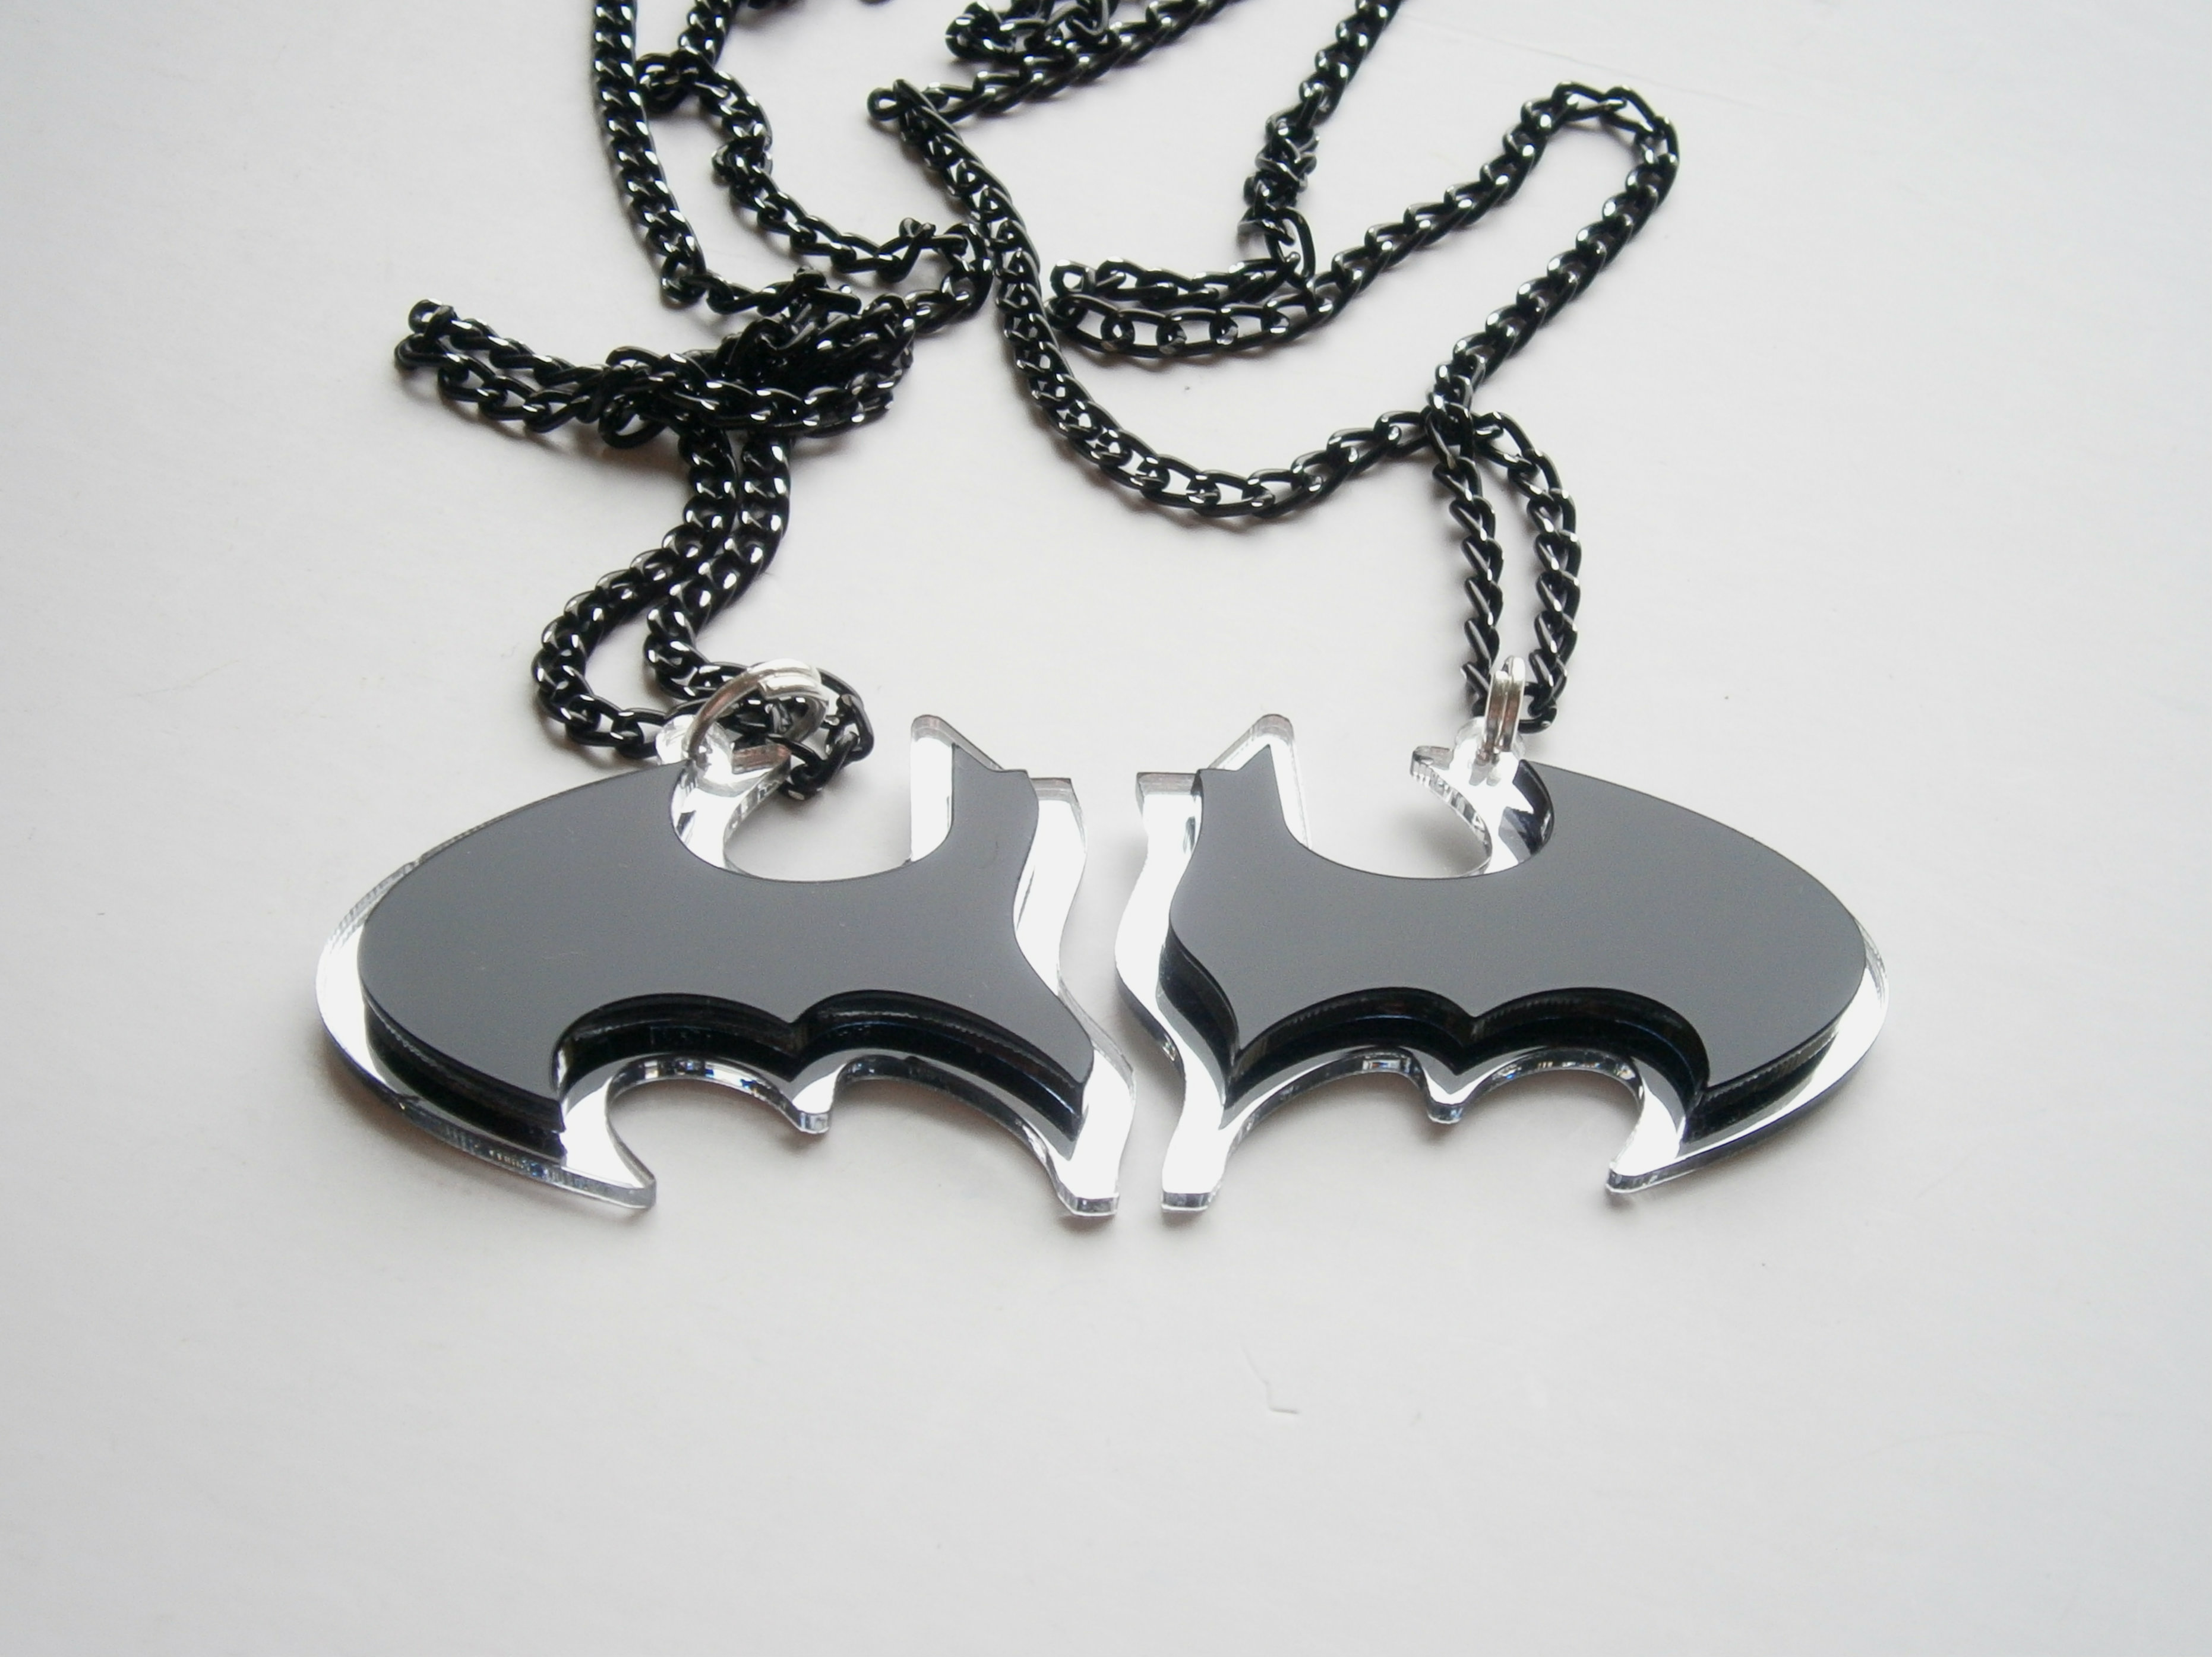 Batman New Necklaces Inspiring Jewelry Friendship necklaces geekery ...